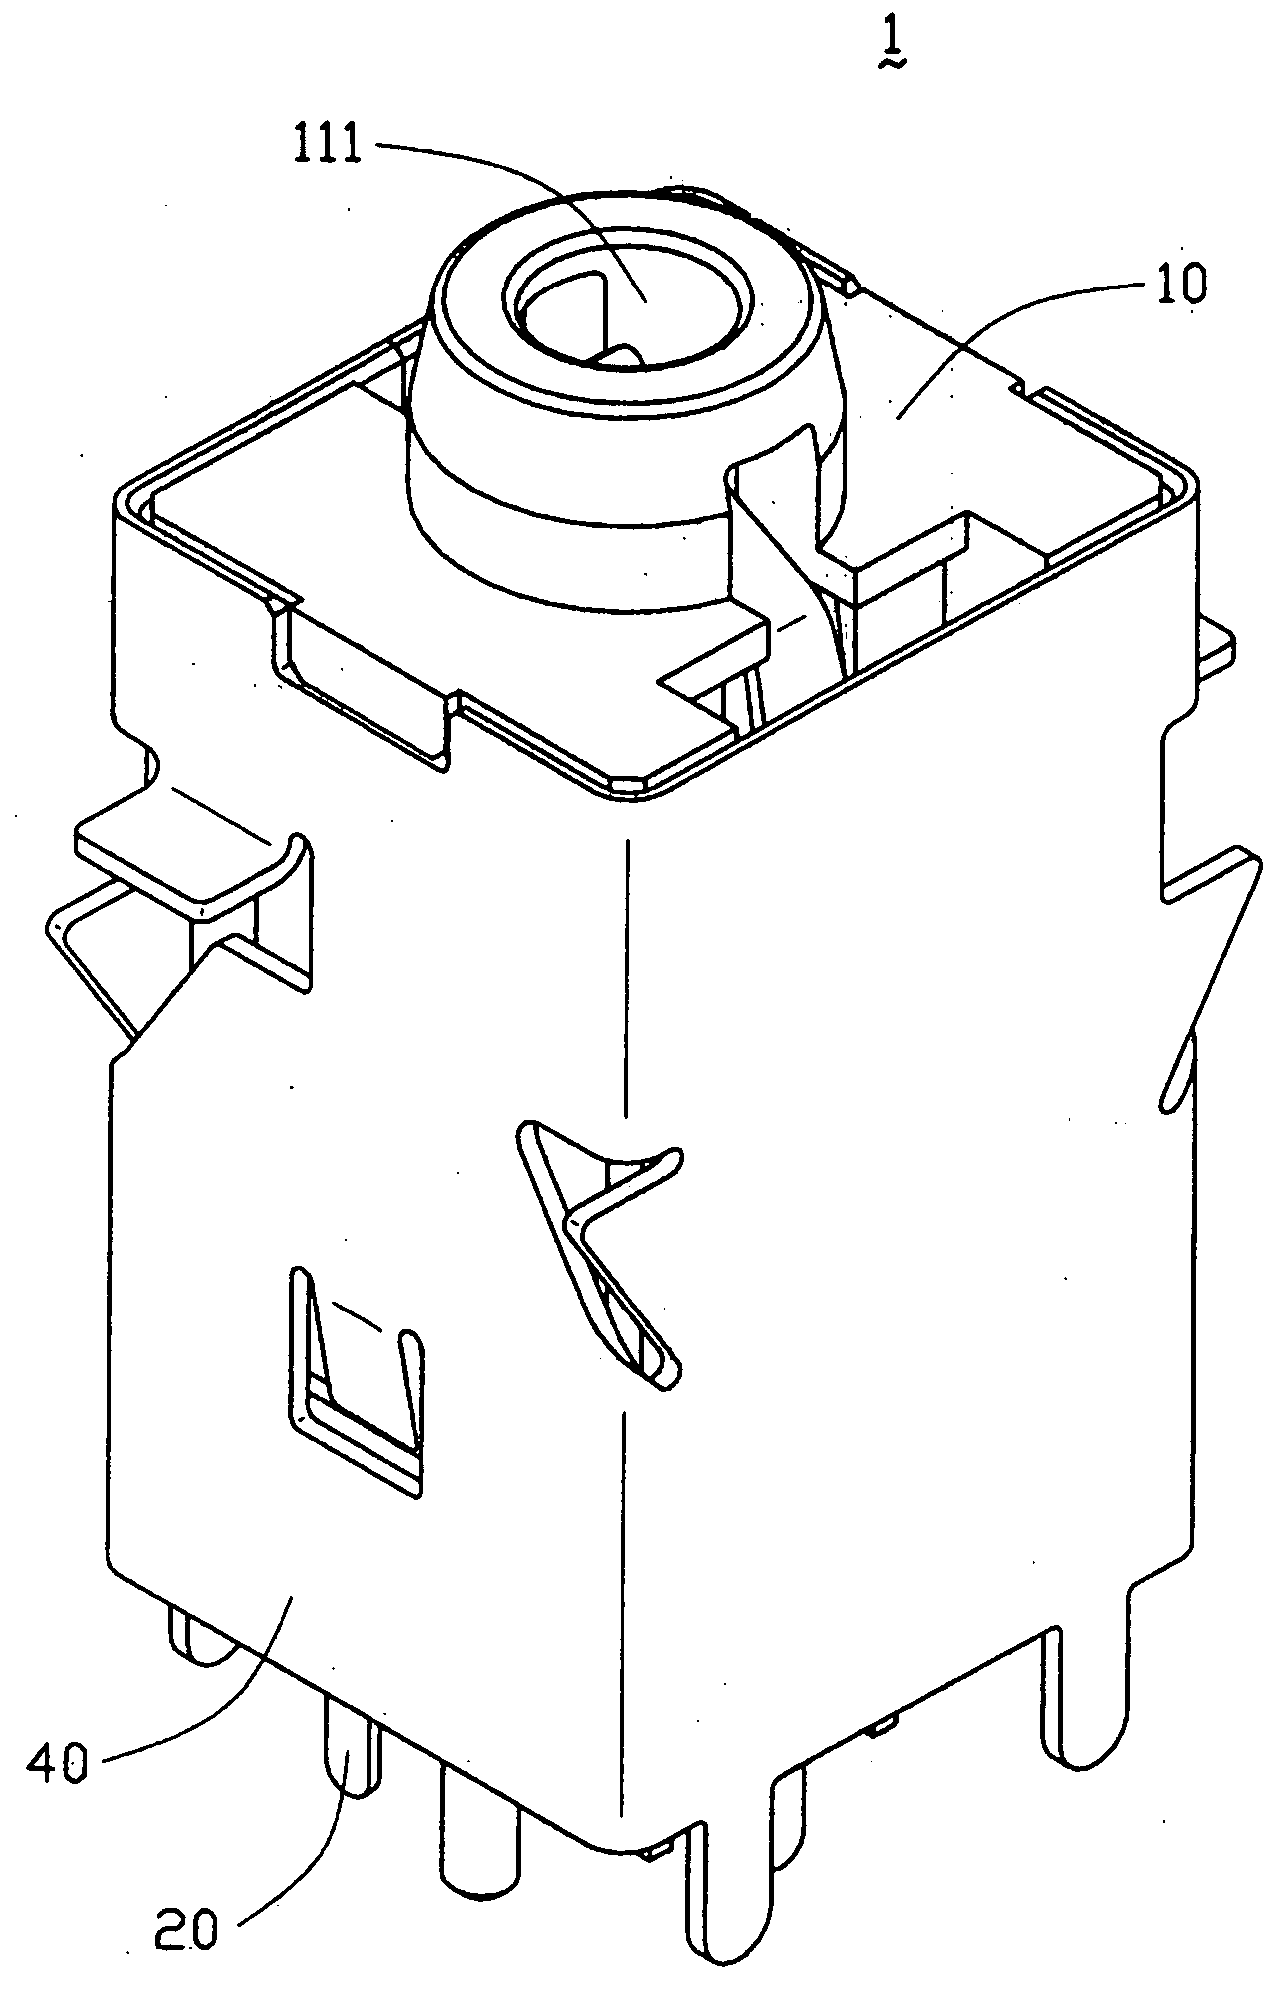 Optical-electric connector